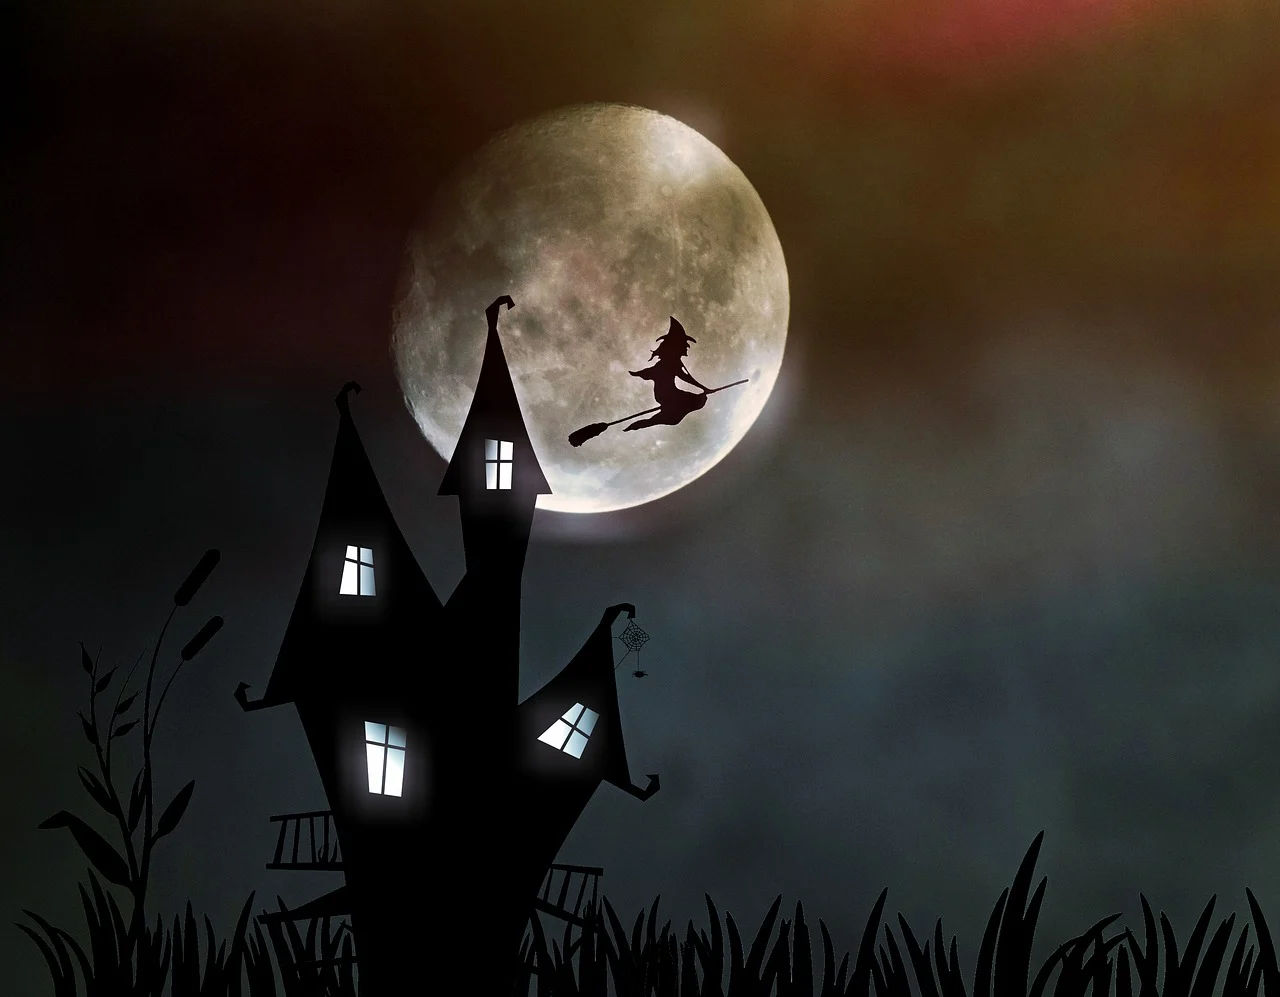 Know the stories behind famous Halloween tales and traditions